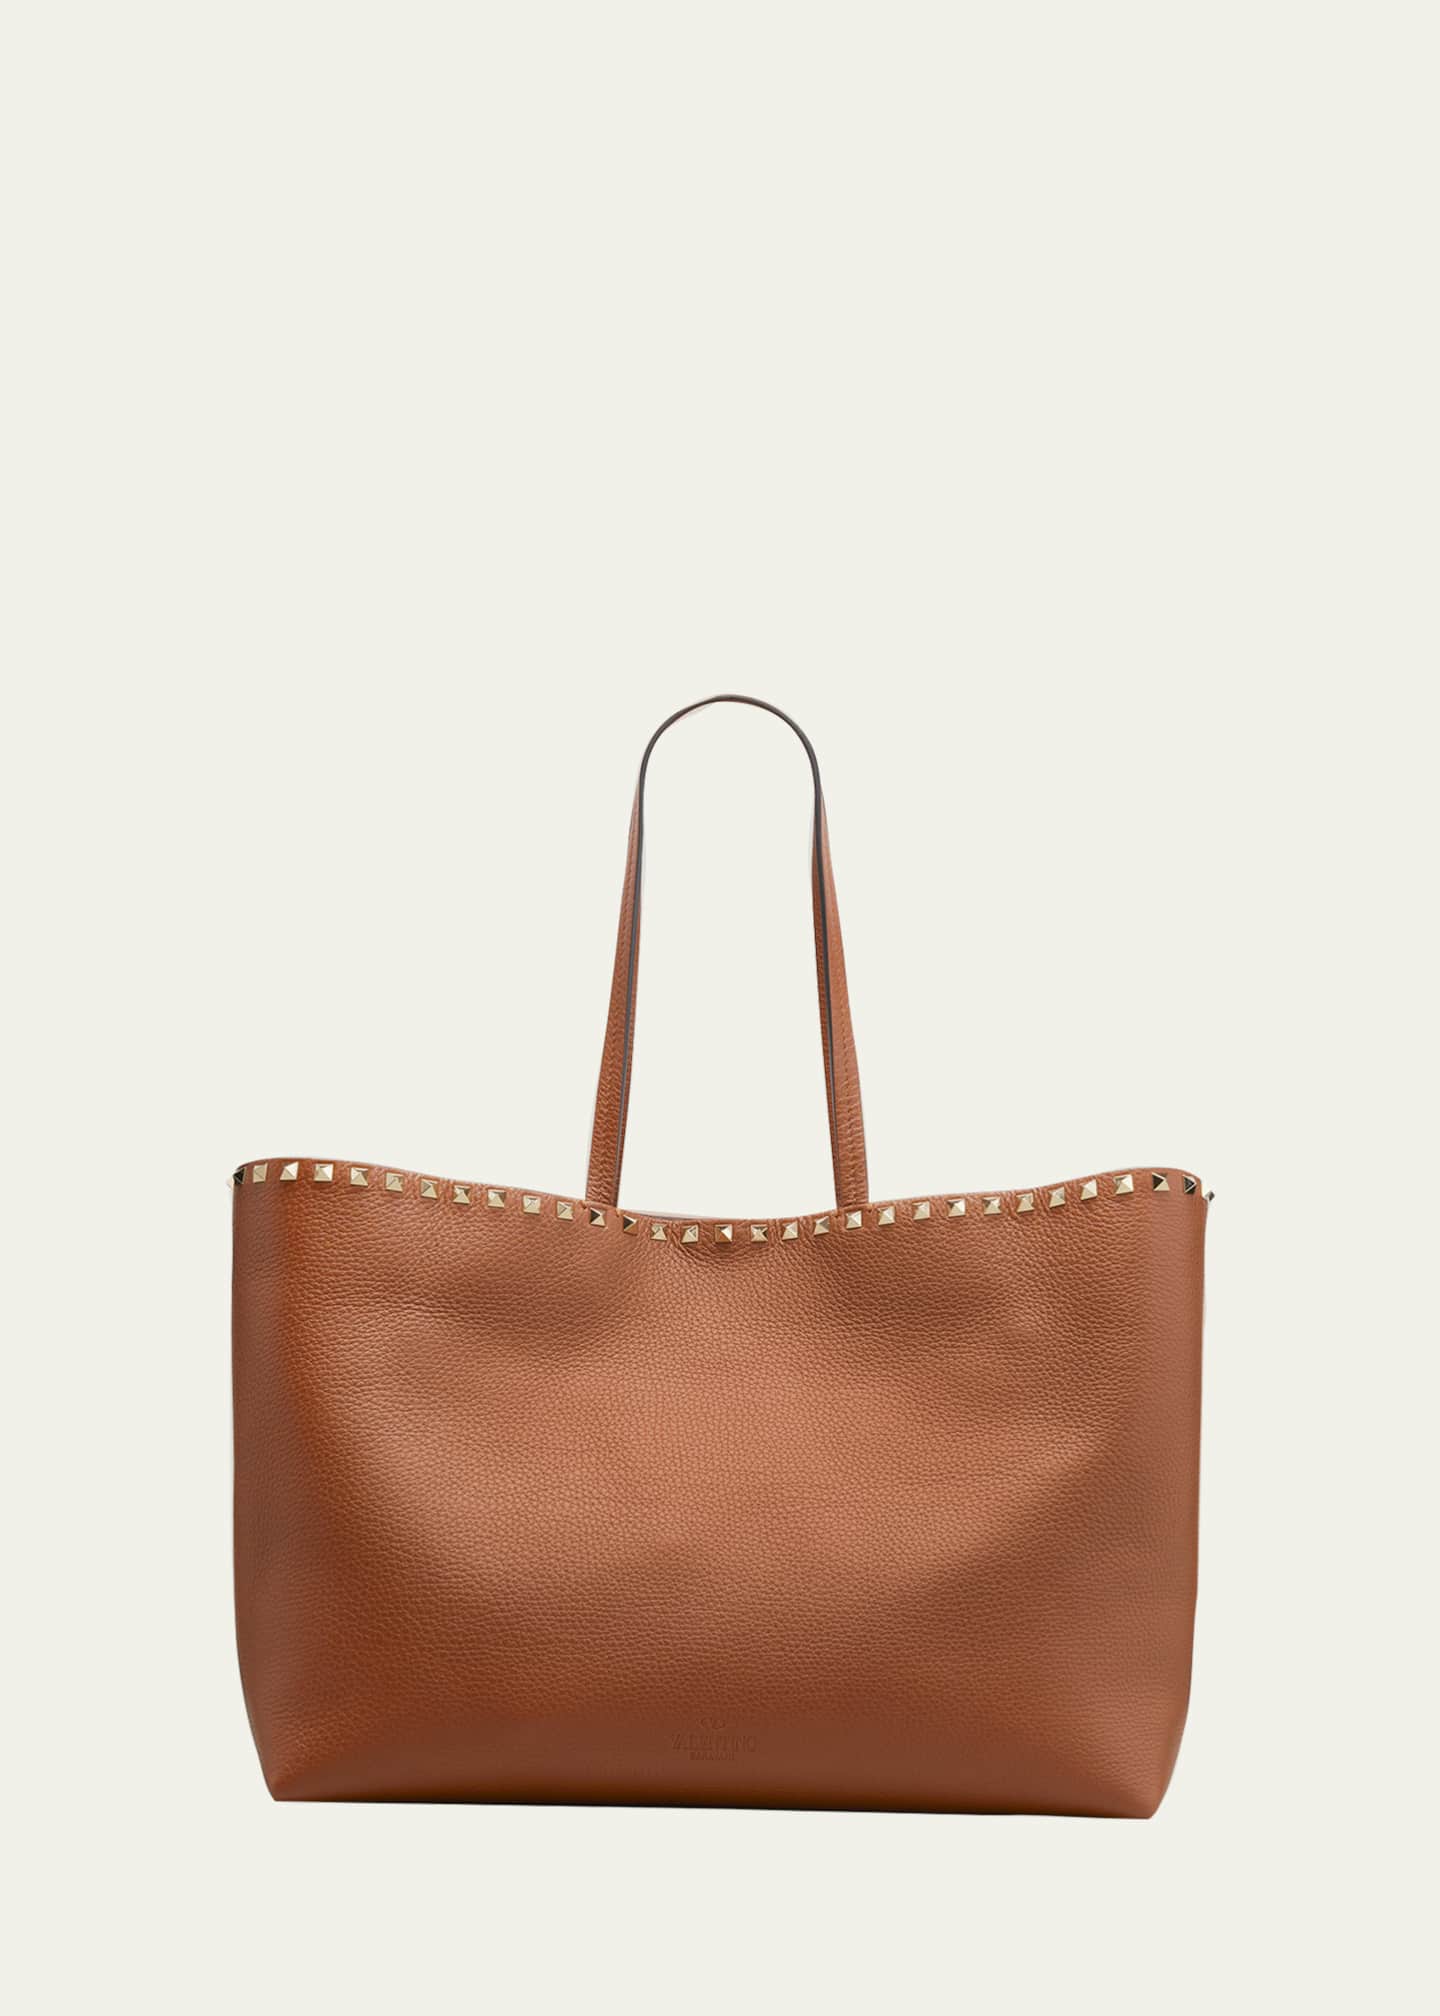 Valentino Rockstud Large Grainy Leather Shopper Tote